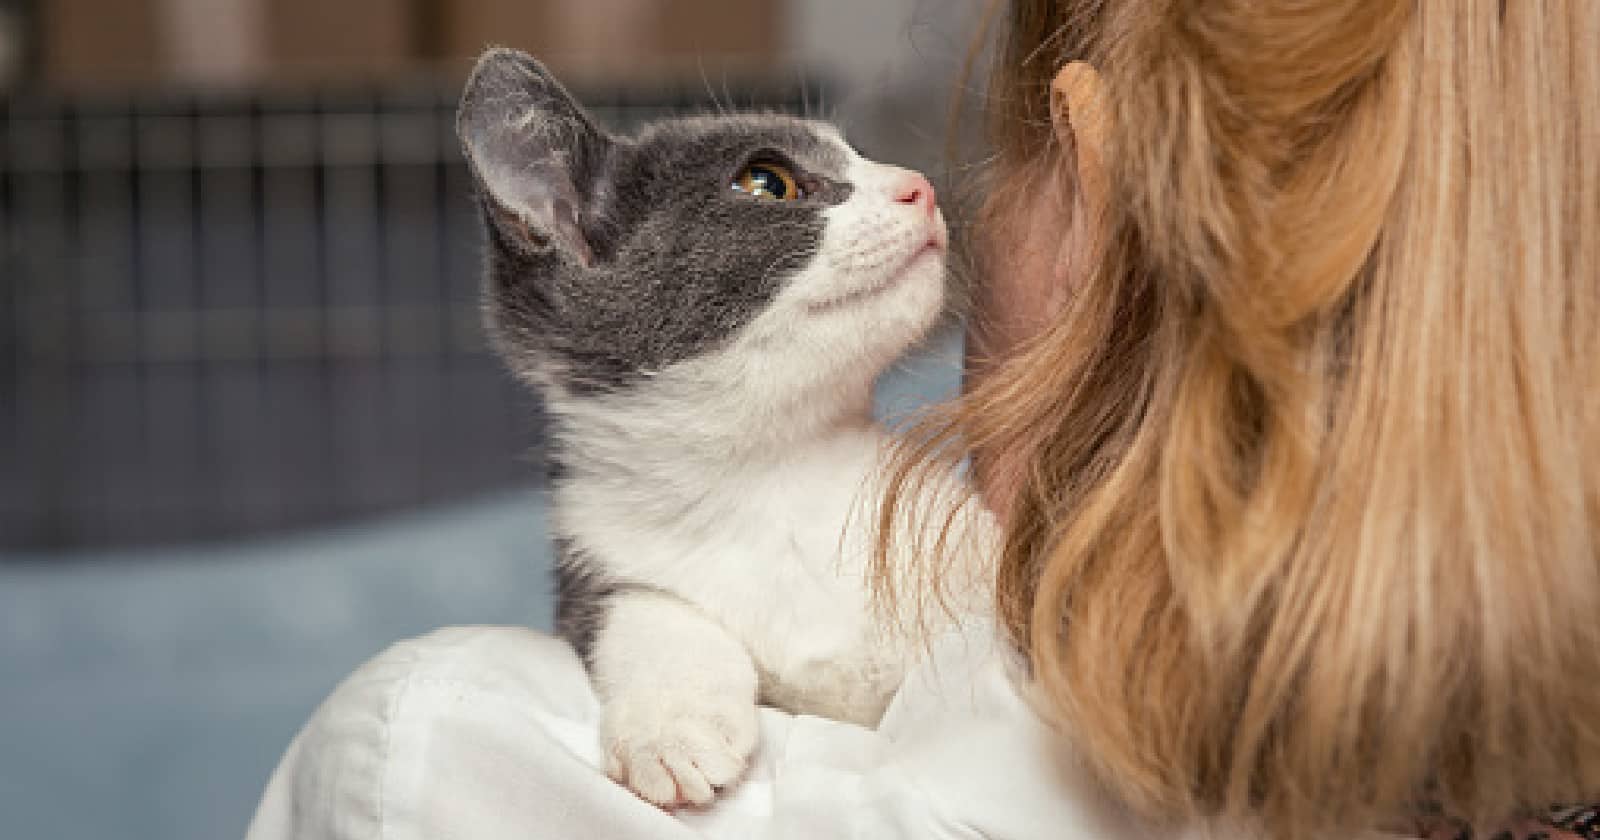 Why does my cat bite my hair? If you're curious about your kitty's fascination with chewing on your lustrous locks, read on for the answers!